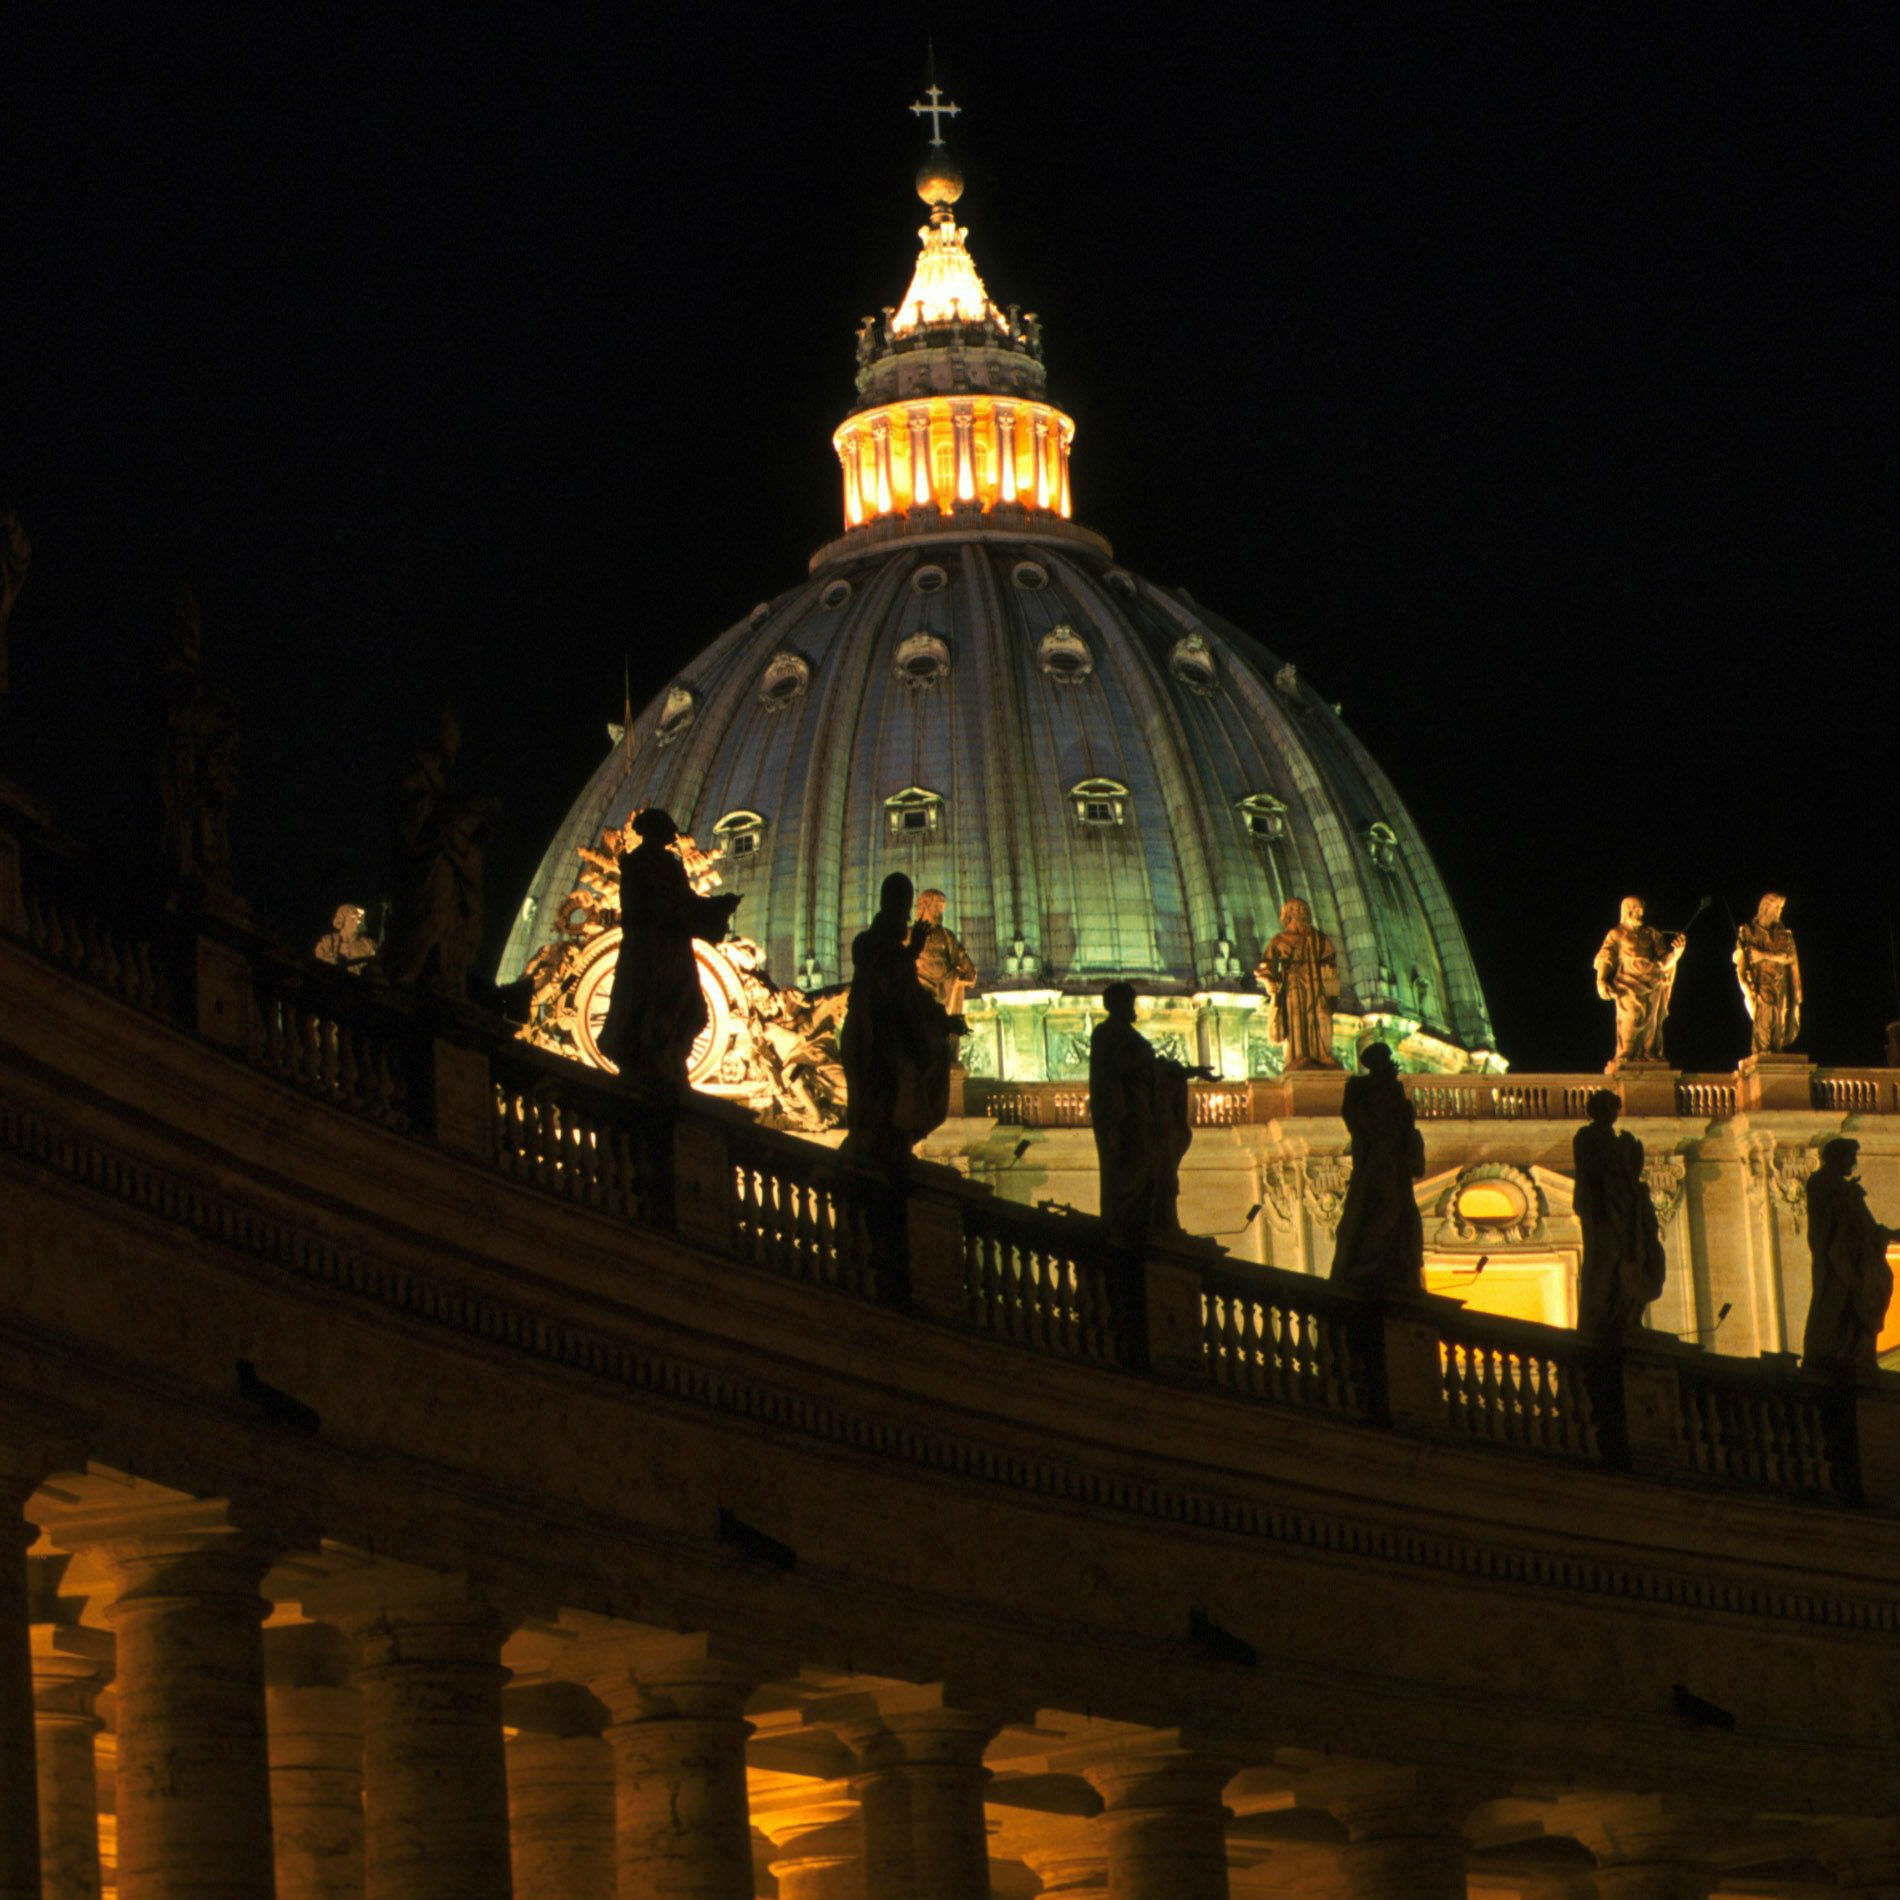 Pope Francis: Saints Peter and Paul are two great lights shining in the hearts of the faithful